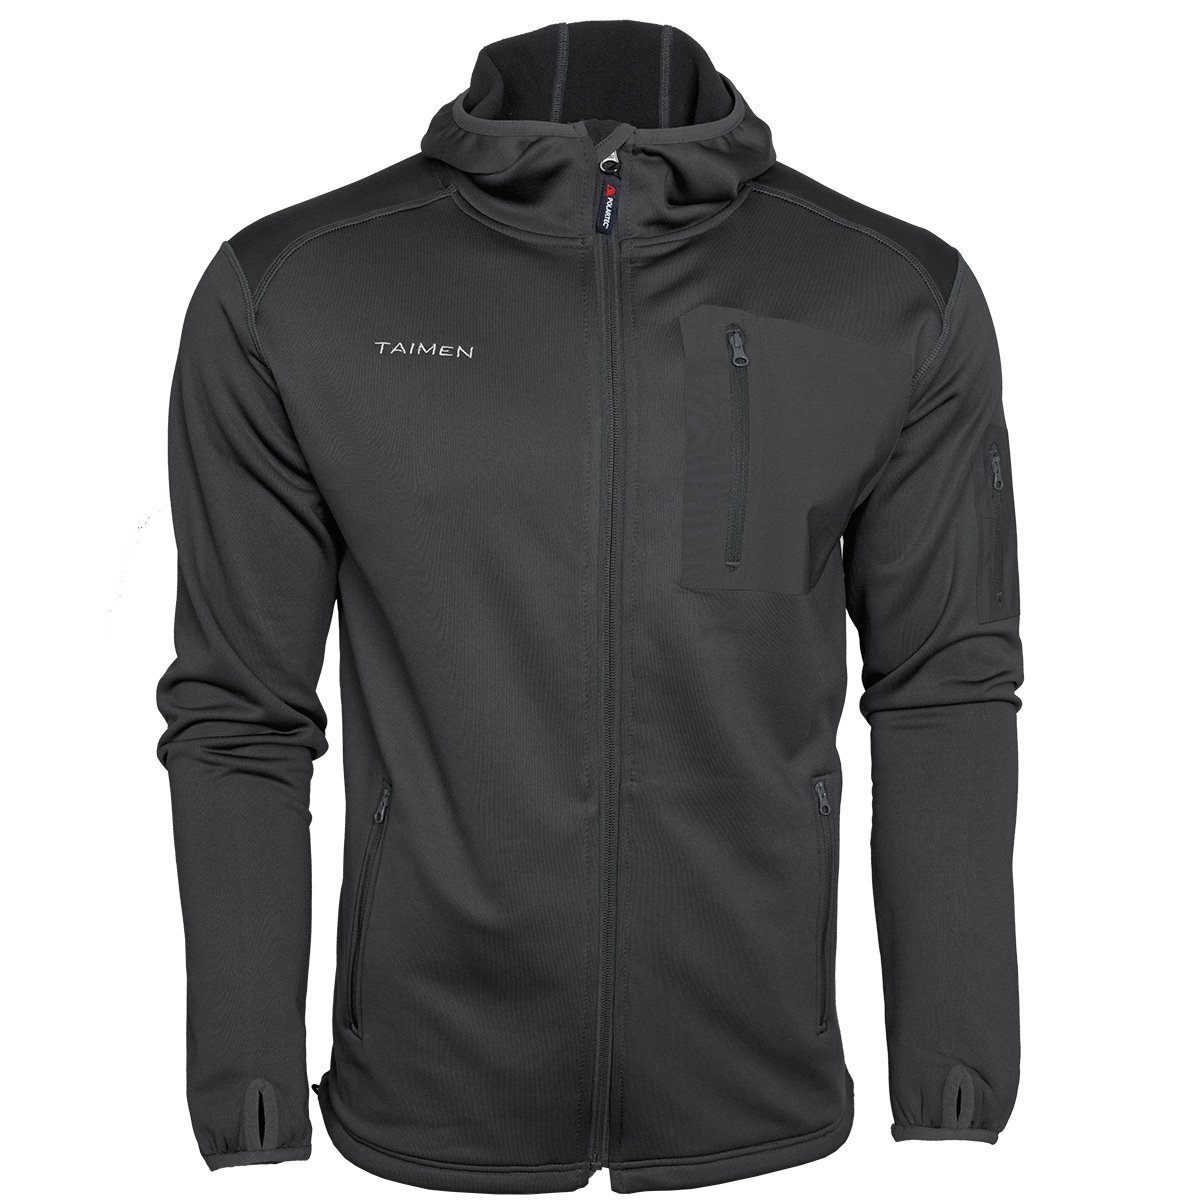 Polartec Power Stretch Hoodie Top Sellers, SAVE 34 